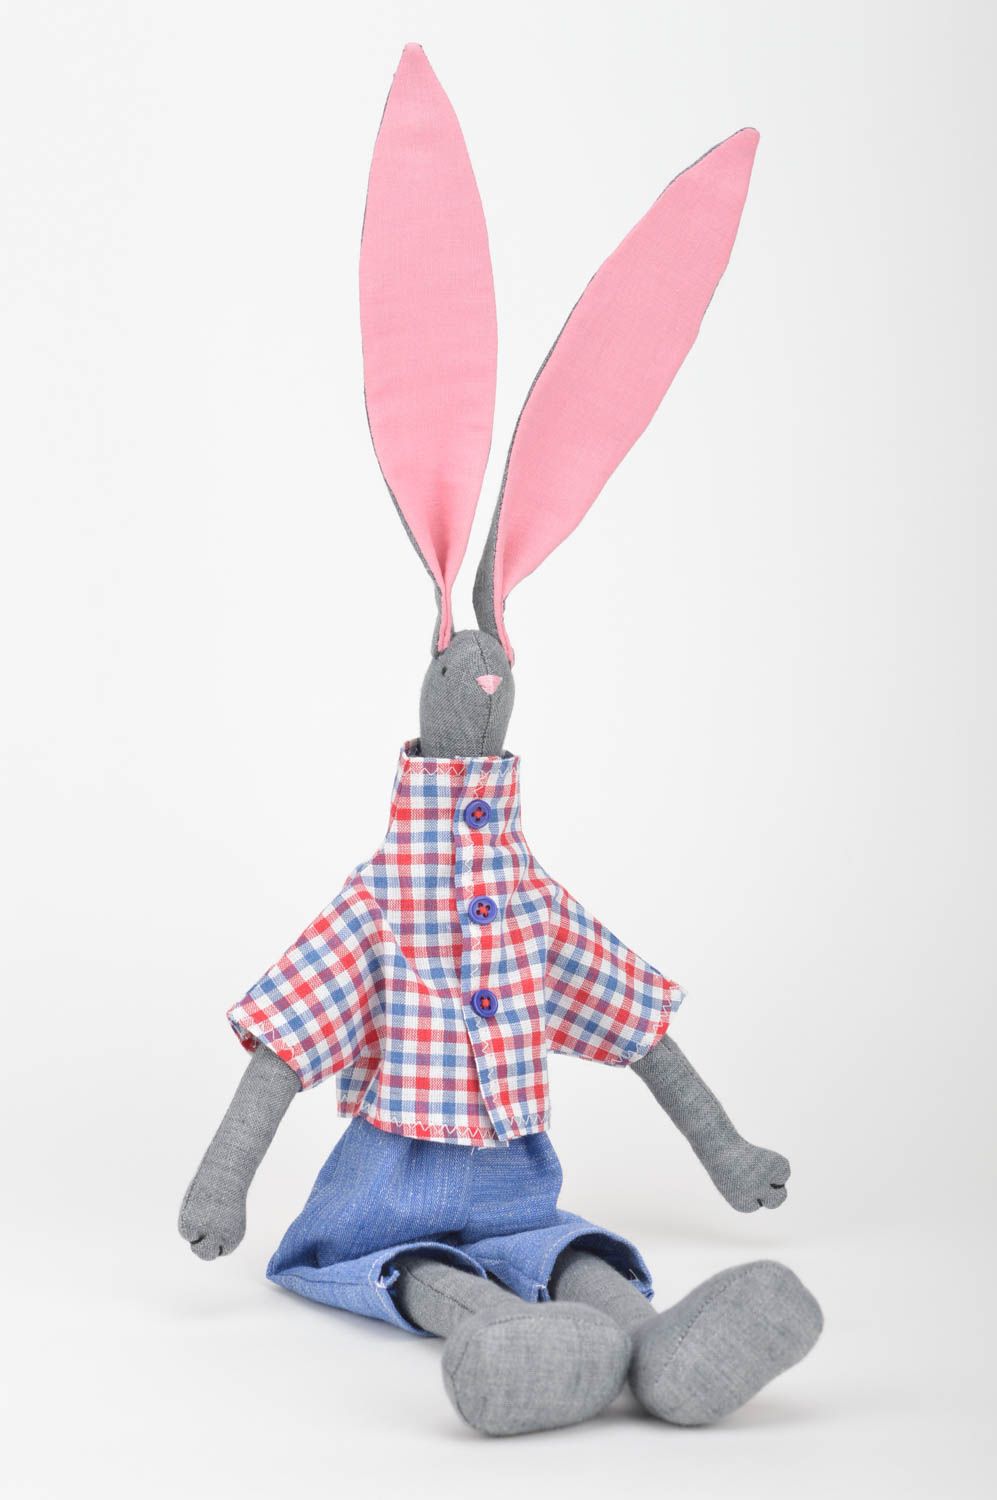 Unusual homemade fabric soft toy Hare for children and interior design photo 2